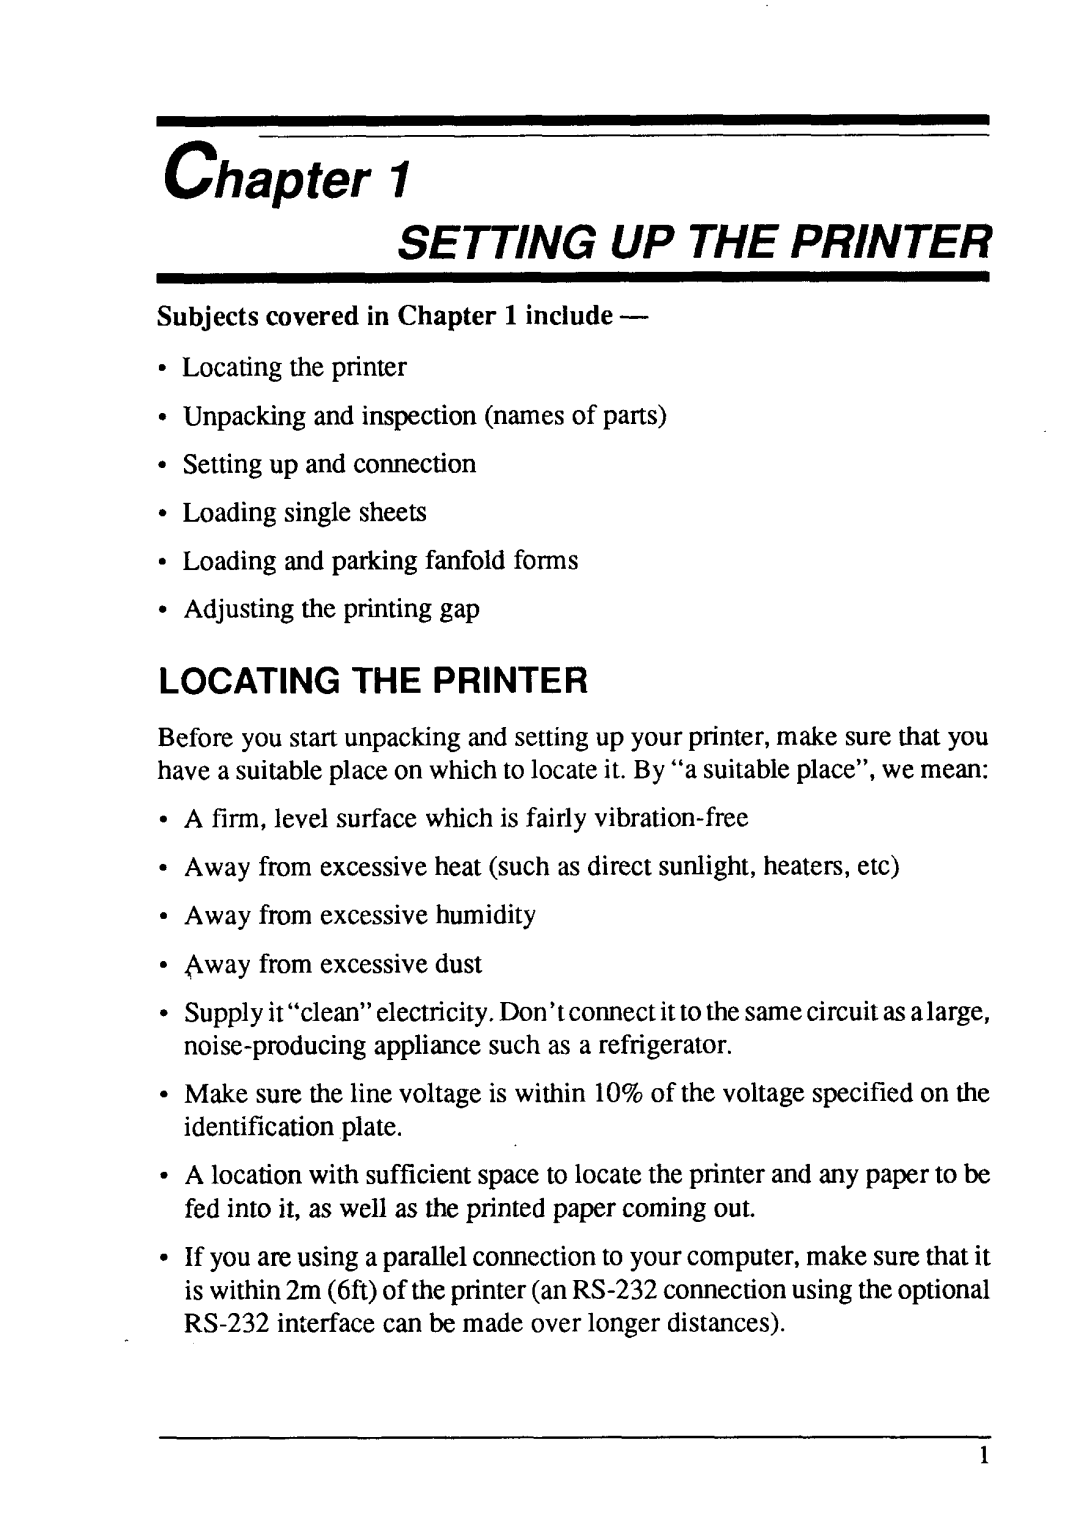 Star Micronics LC24-15 user manual Chapter, Setting Up The Printer, Locating The Printer, Subjects covered in include 